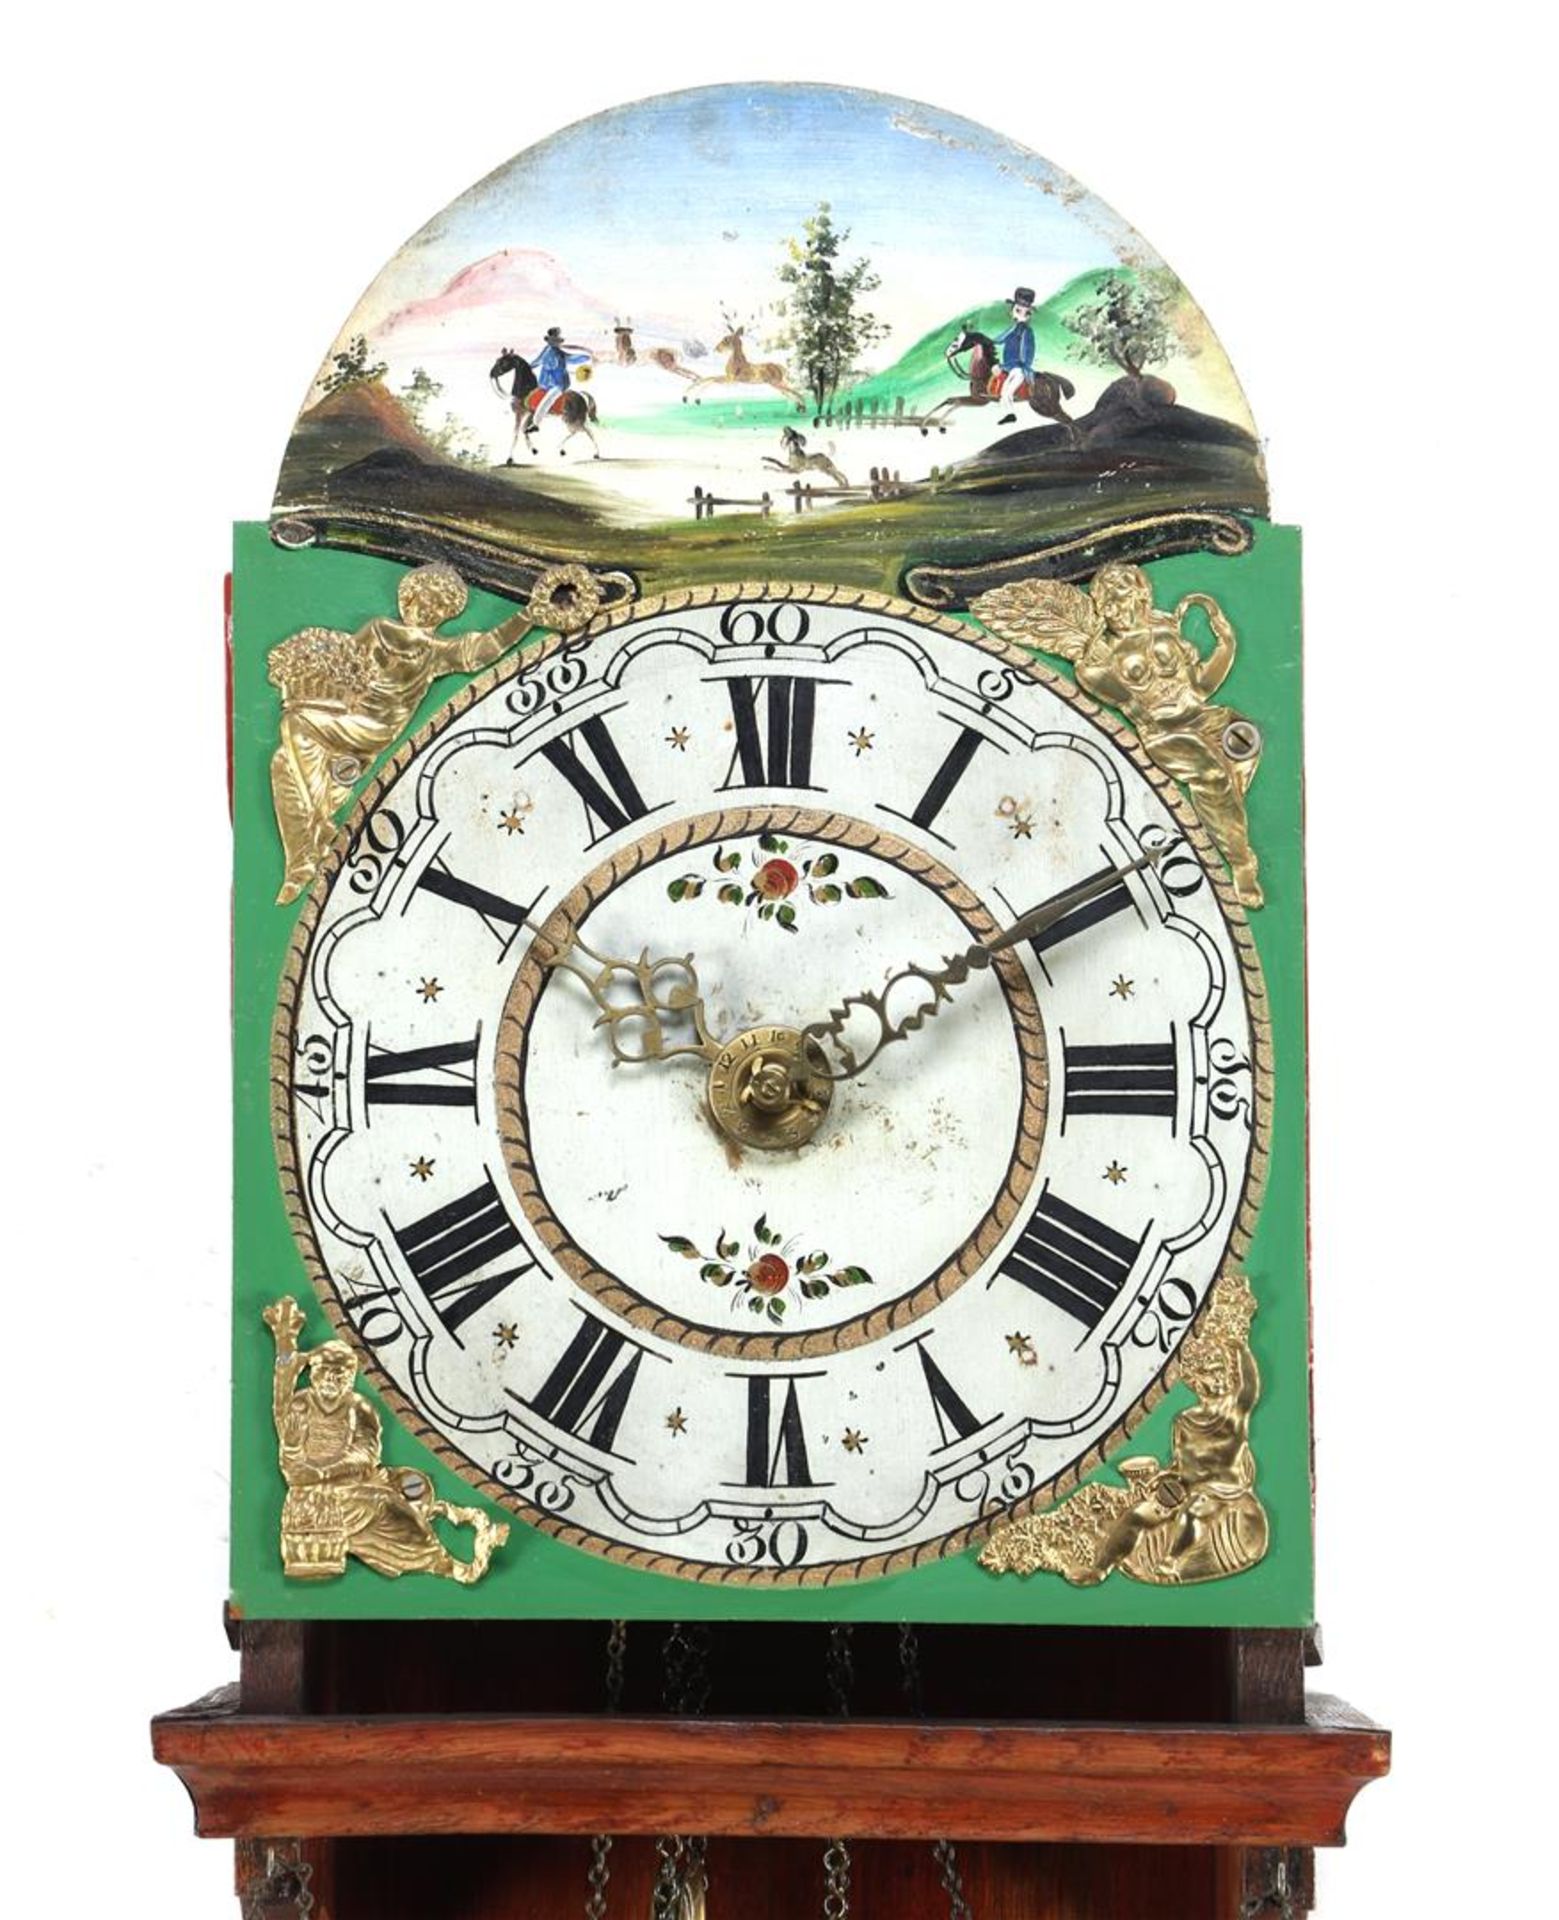 Frisian tail clock with painted hunting scene - Image 2 of 3